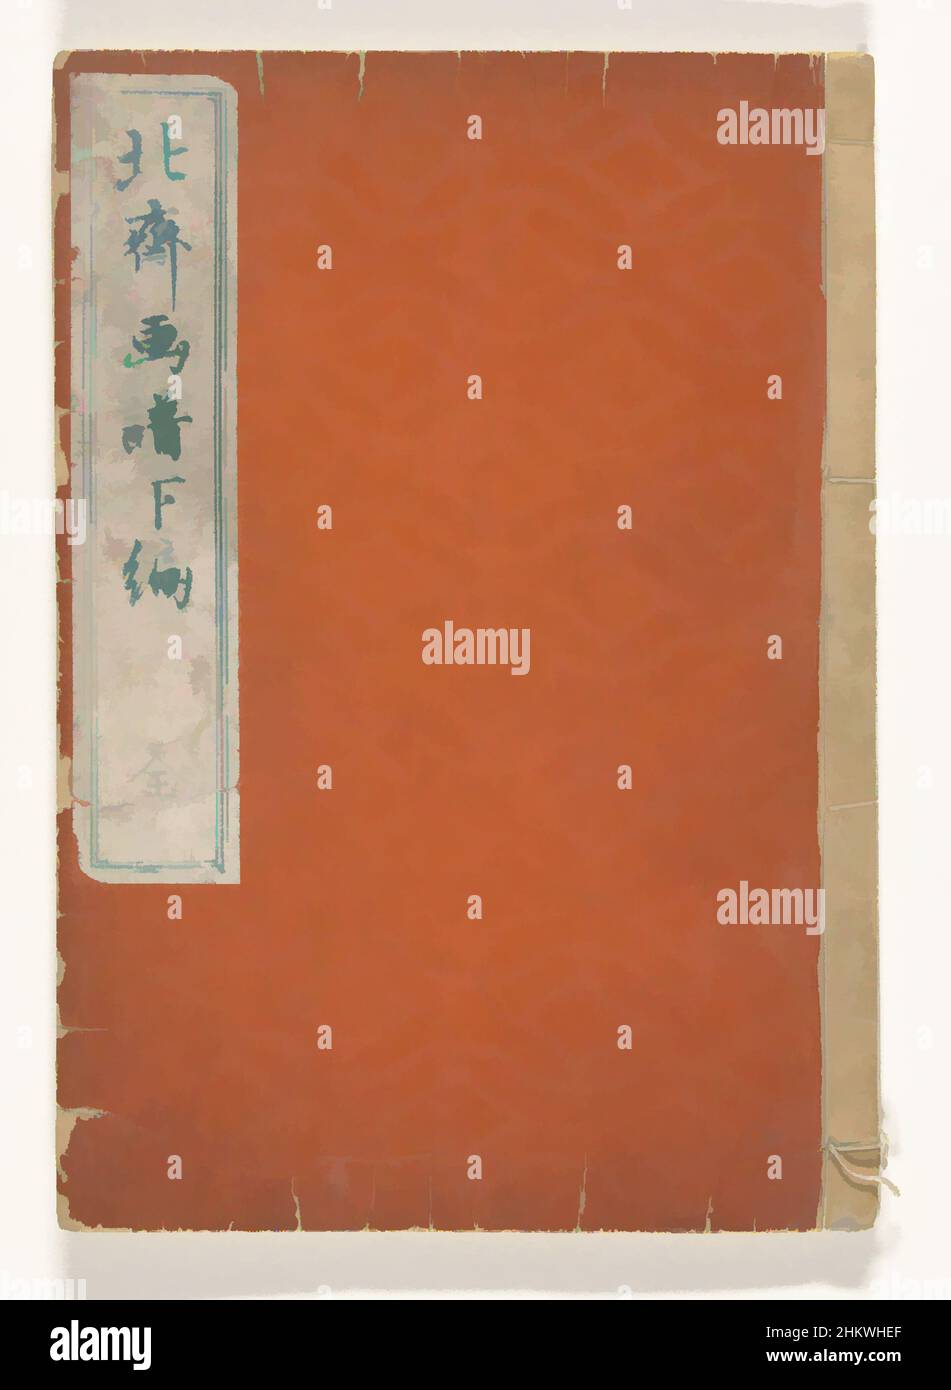 Art inspired by Sketchbook of Hokusai - third volume, Hokusai gafu gehen, Volume three (of three); orange cover; top left white-green title strip; cover page, advertisement for publisher Tohekido; 20 sheets; numbered: 1-20 (17 missing), illustrations of persons, gods, animals and, Classic works modernized by Artotop with a splash of modernity. Shapes, color and value, eye-catching visual impact on art. Emotions through freedom of artworks in a contemporary way. A timeless message pursuing a wildly creative new direction. Artists turning to the digital medium and creating the Artotop NFT Stock Photo